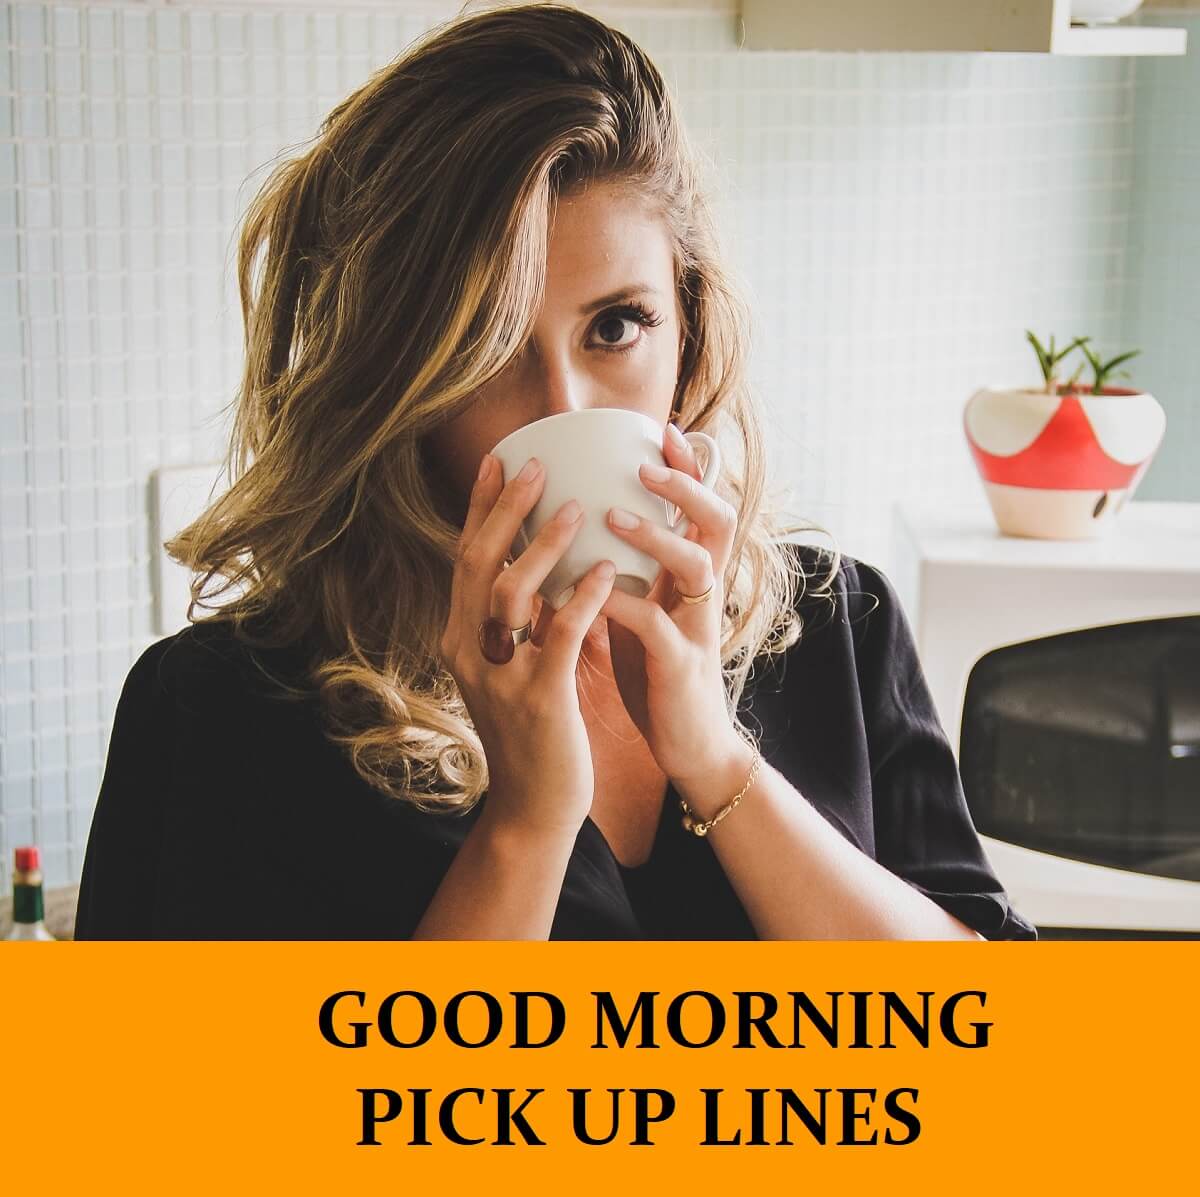 69 Good Morning Pick Up Lines [Funny, Dirty, Cheesy]